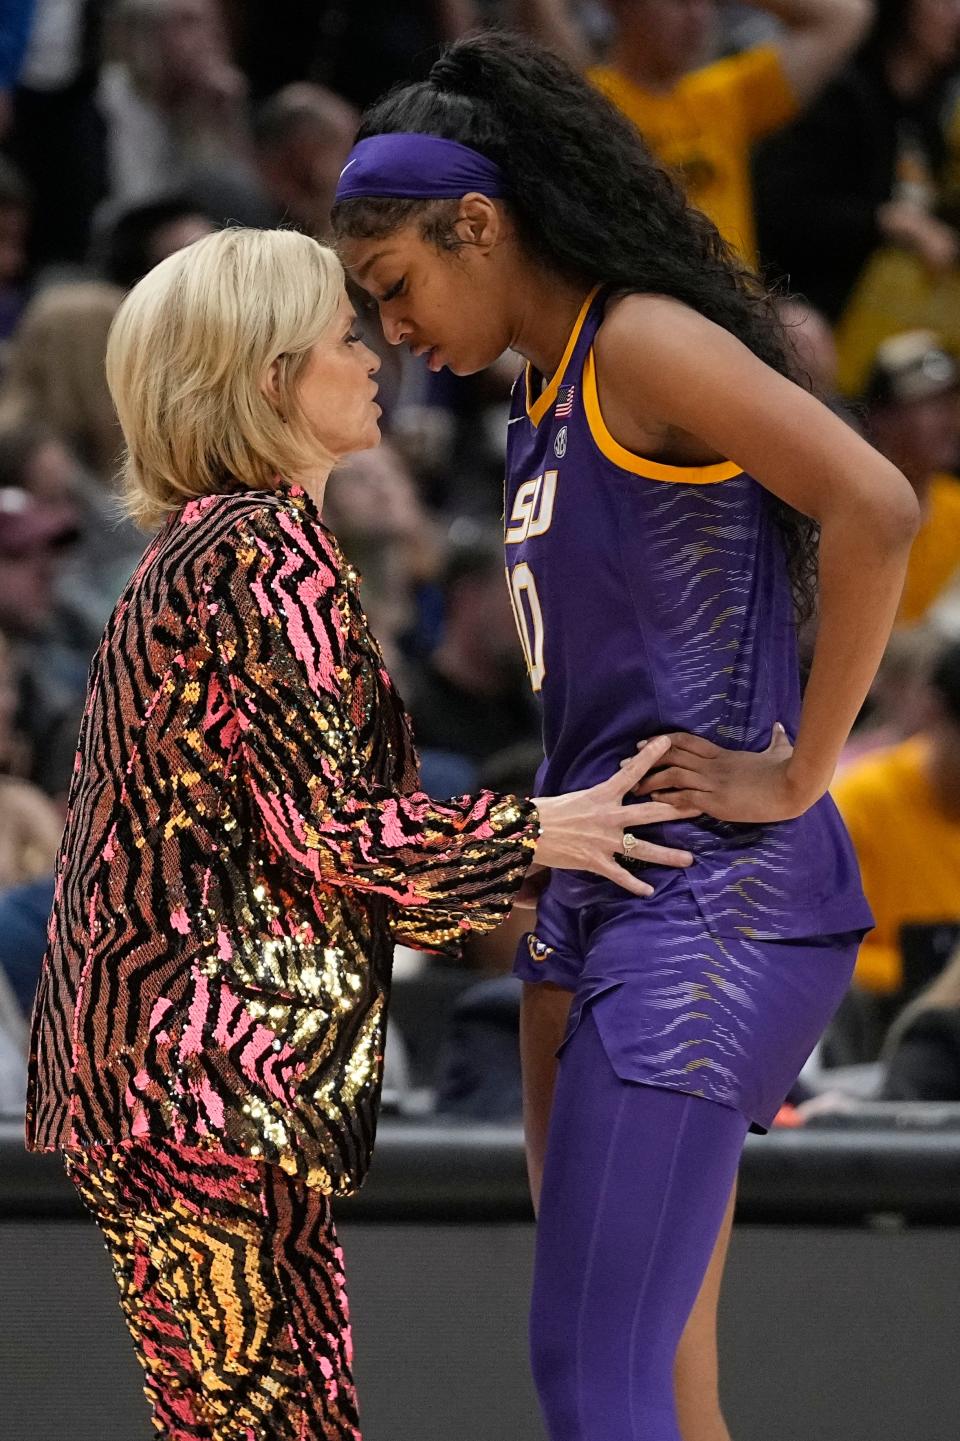 Lsu Womens Basketball Coach Kim Mulkey Cries In Final Seconds Of Ncaa Championship Win For Home 